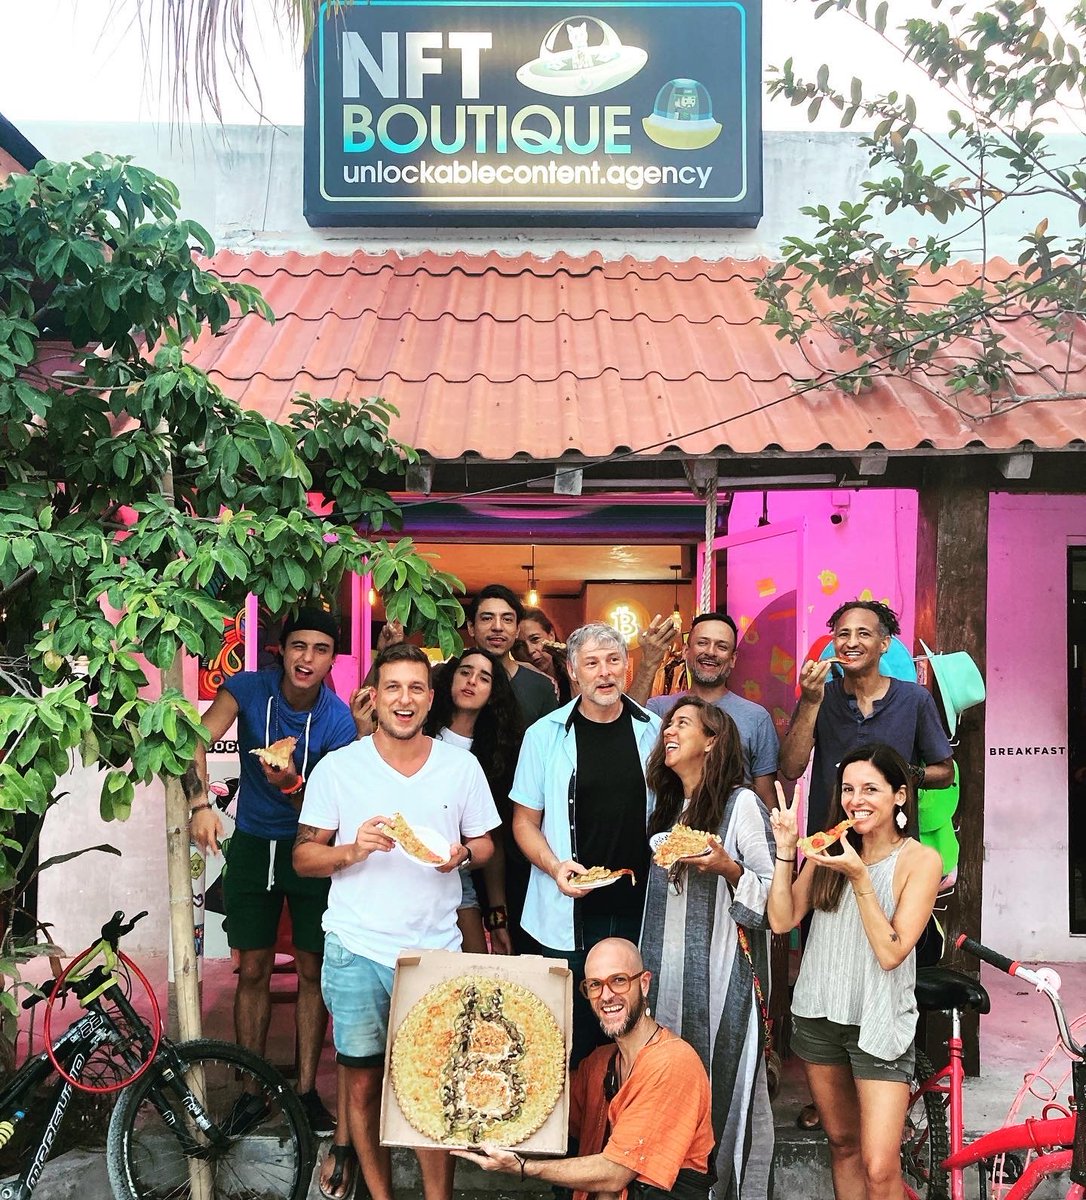 We are so excited for #BitcoinPizzaDay TULUM💫🌴🌎🍕 On May 22, 2024 plus Monthly Earth Day Beach Cleanup! Hosted by @Pizza_DAO @SelinaHotels @petgasmx @Celo @TulumCoinDAO @UnlockContent #globalPizzaParty bit.ly/3wI5Mj9